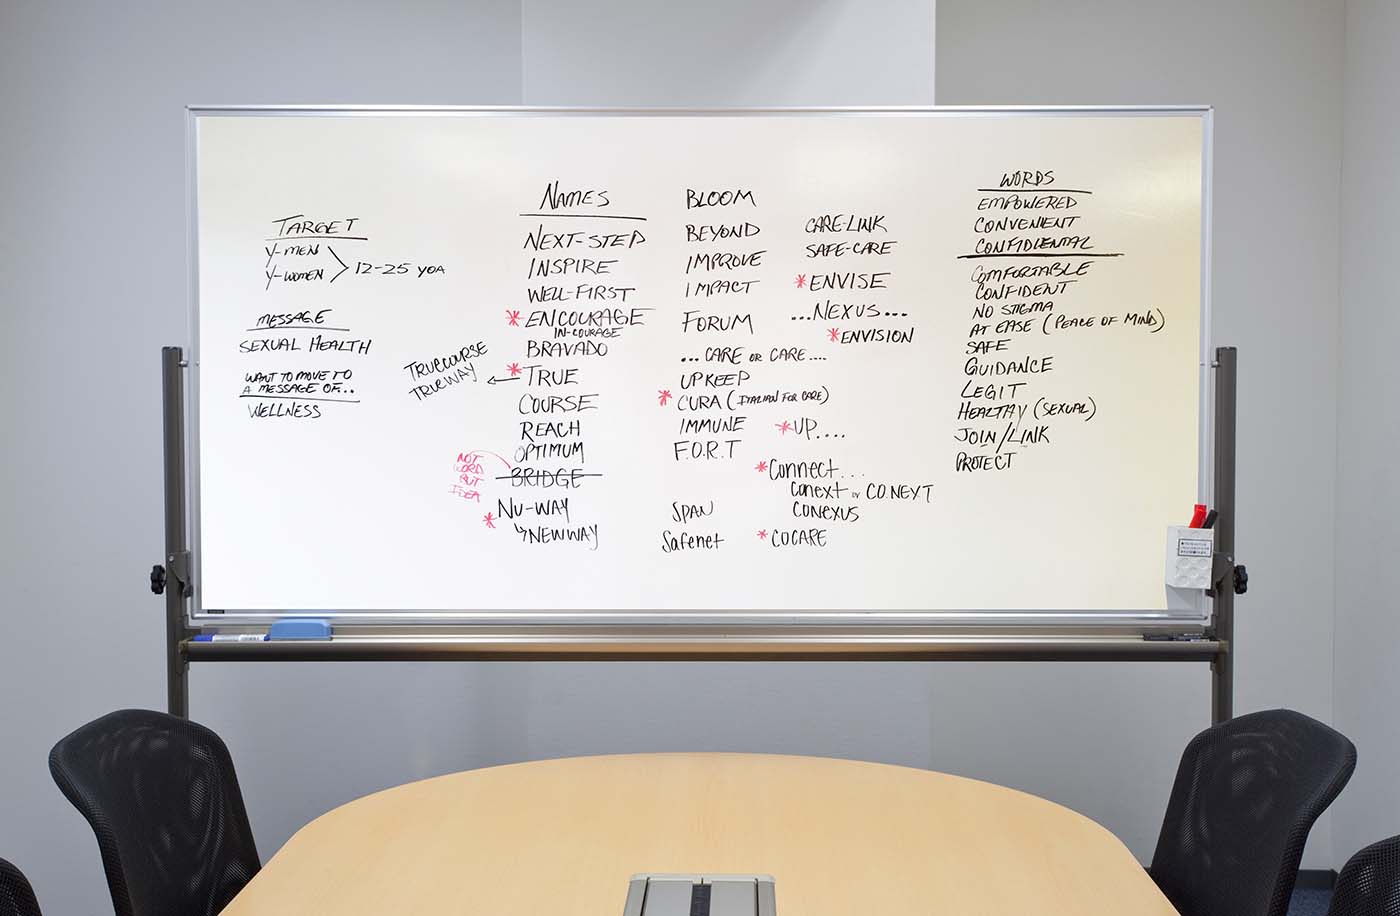 whiteboard showing brainstorming process for new Healthfirst name